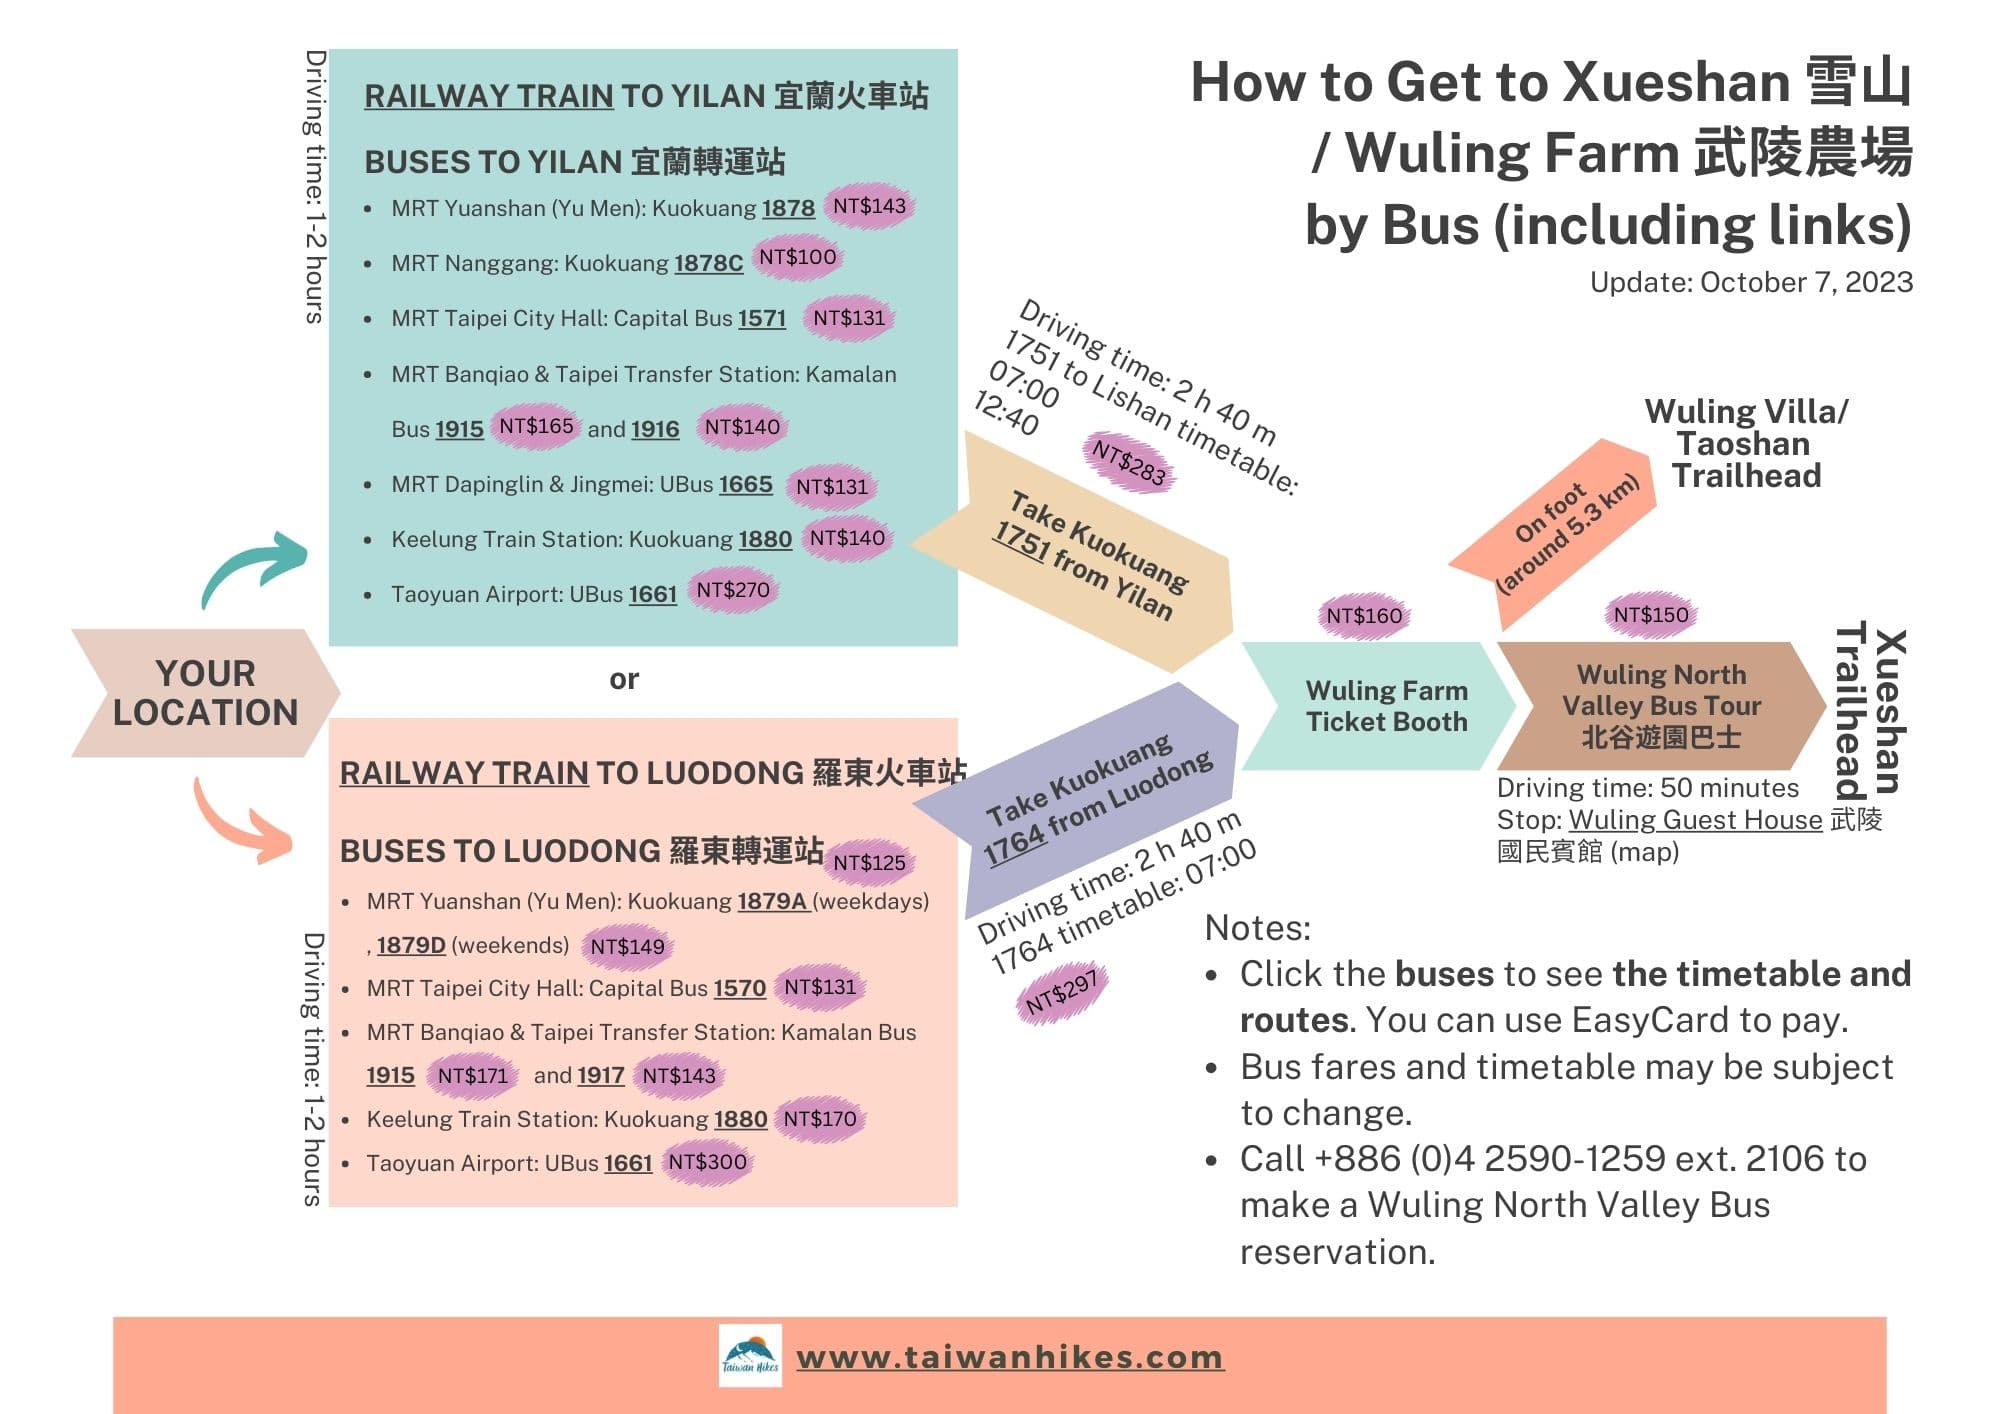 Flow chart about taking bus to Wuling Farm and Xueshan Trailhead